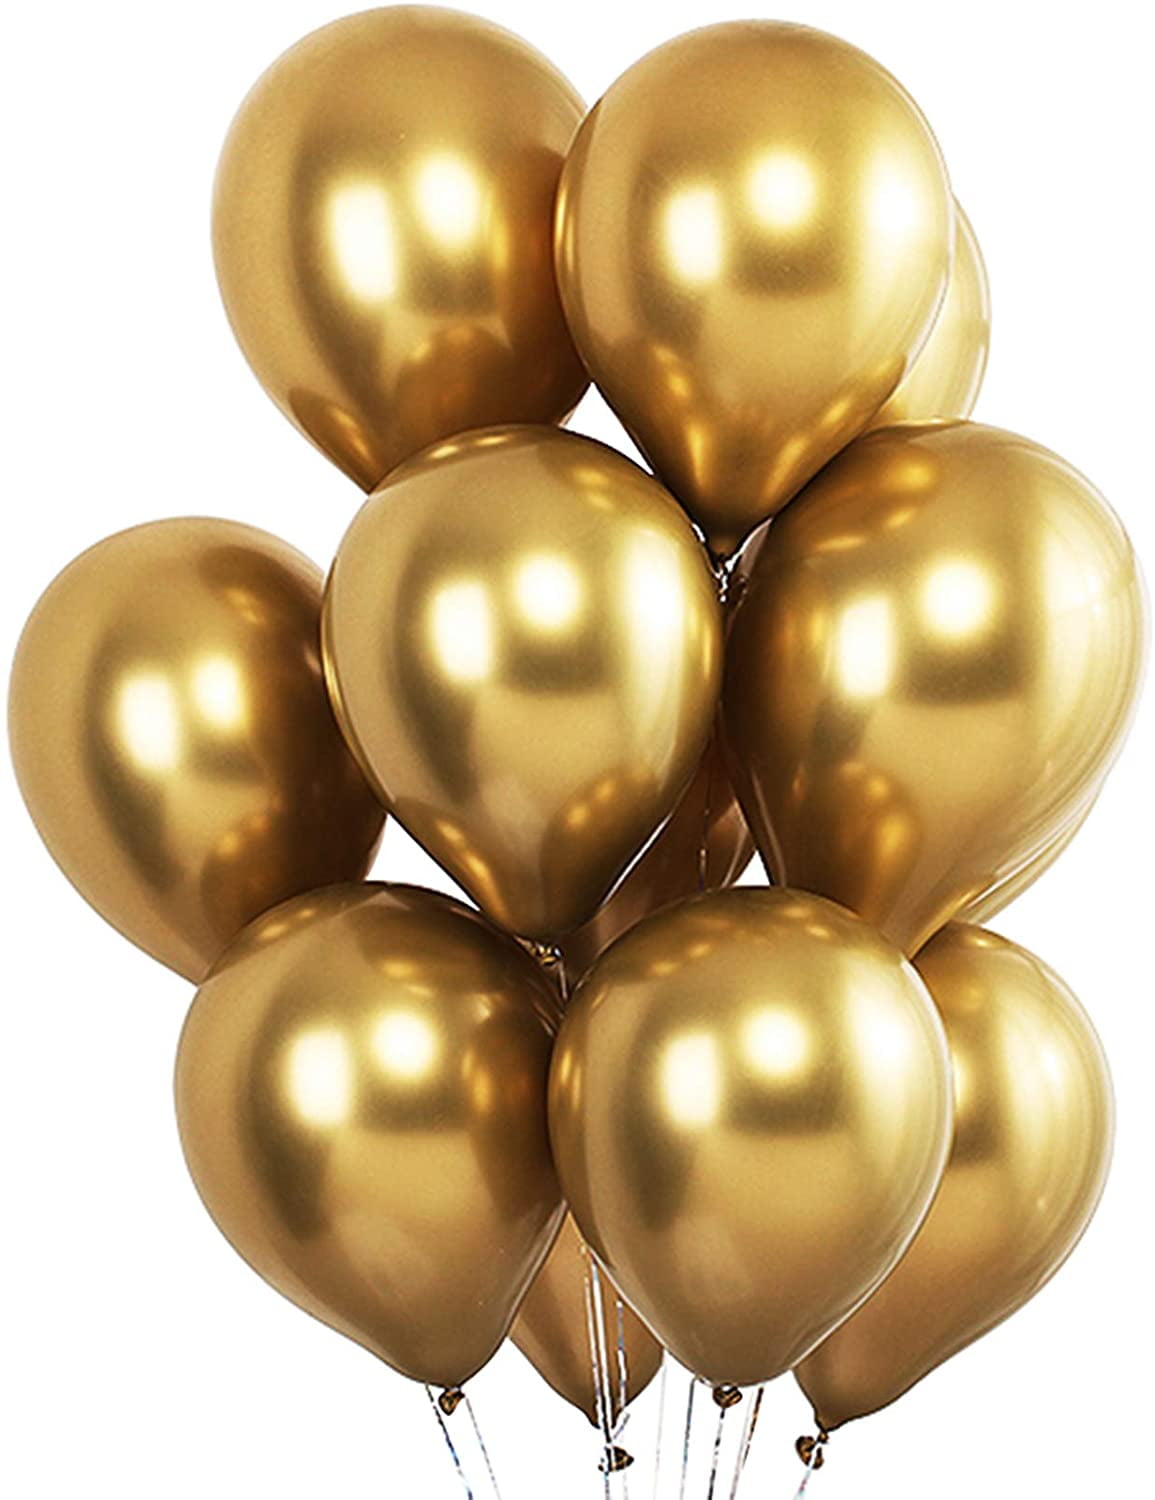 ZOOYOO 5 Inch Sliver Chrome Balloons Metallic Party Latex Helium Balloon,Pack of 50 